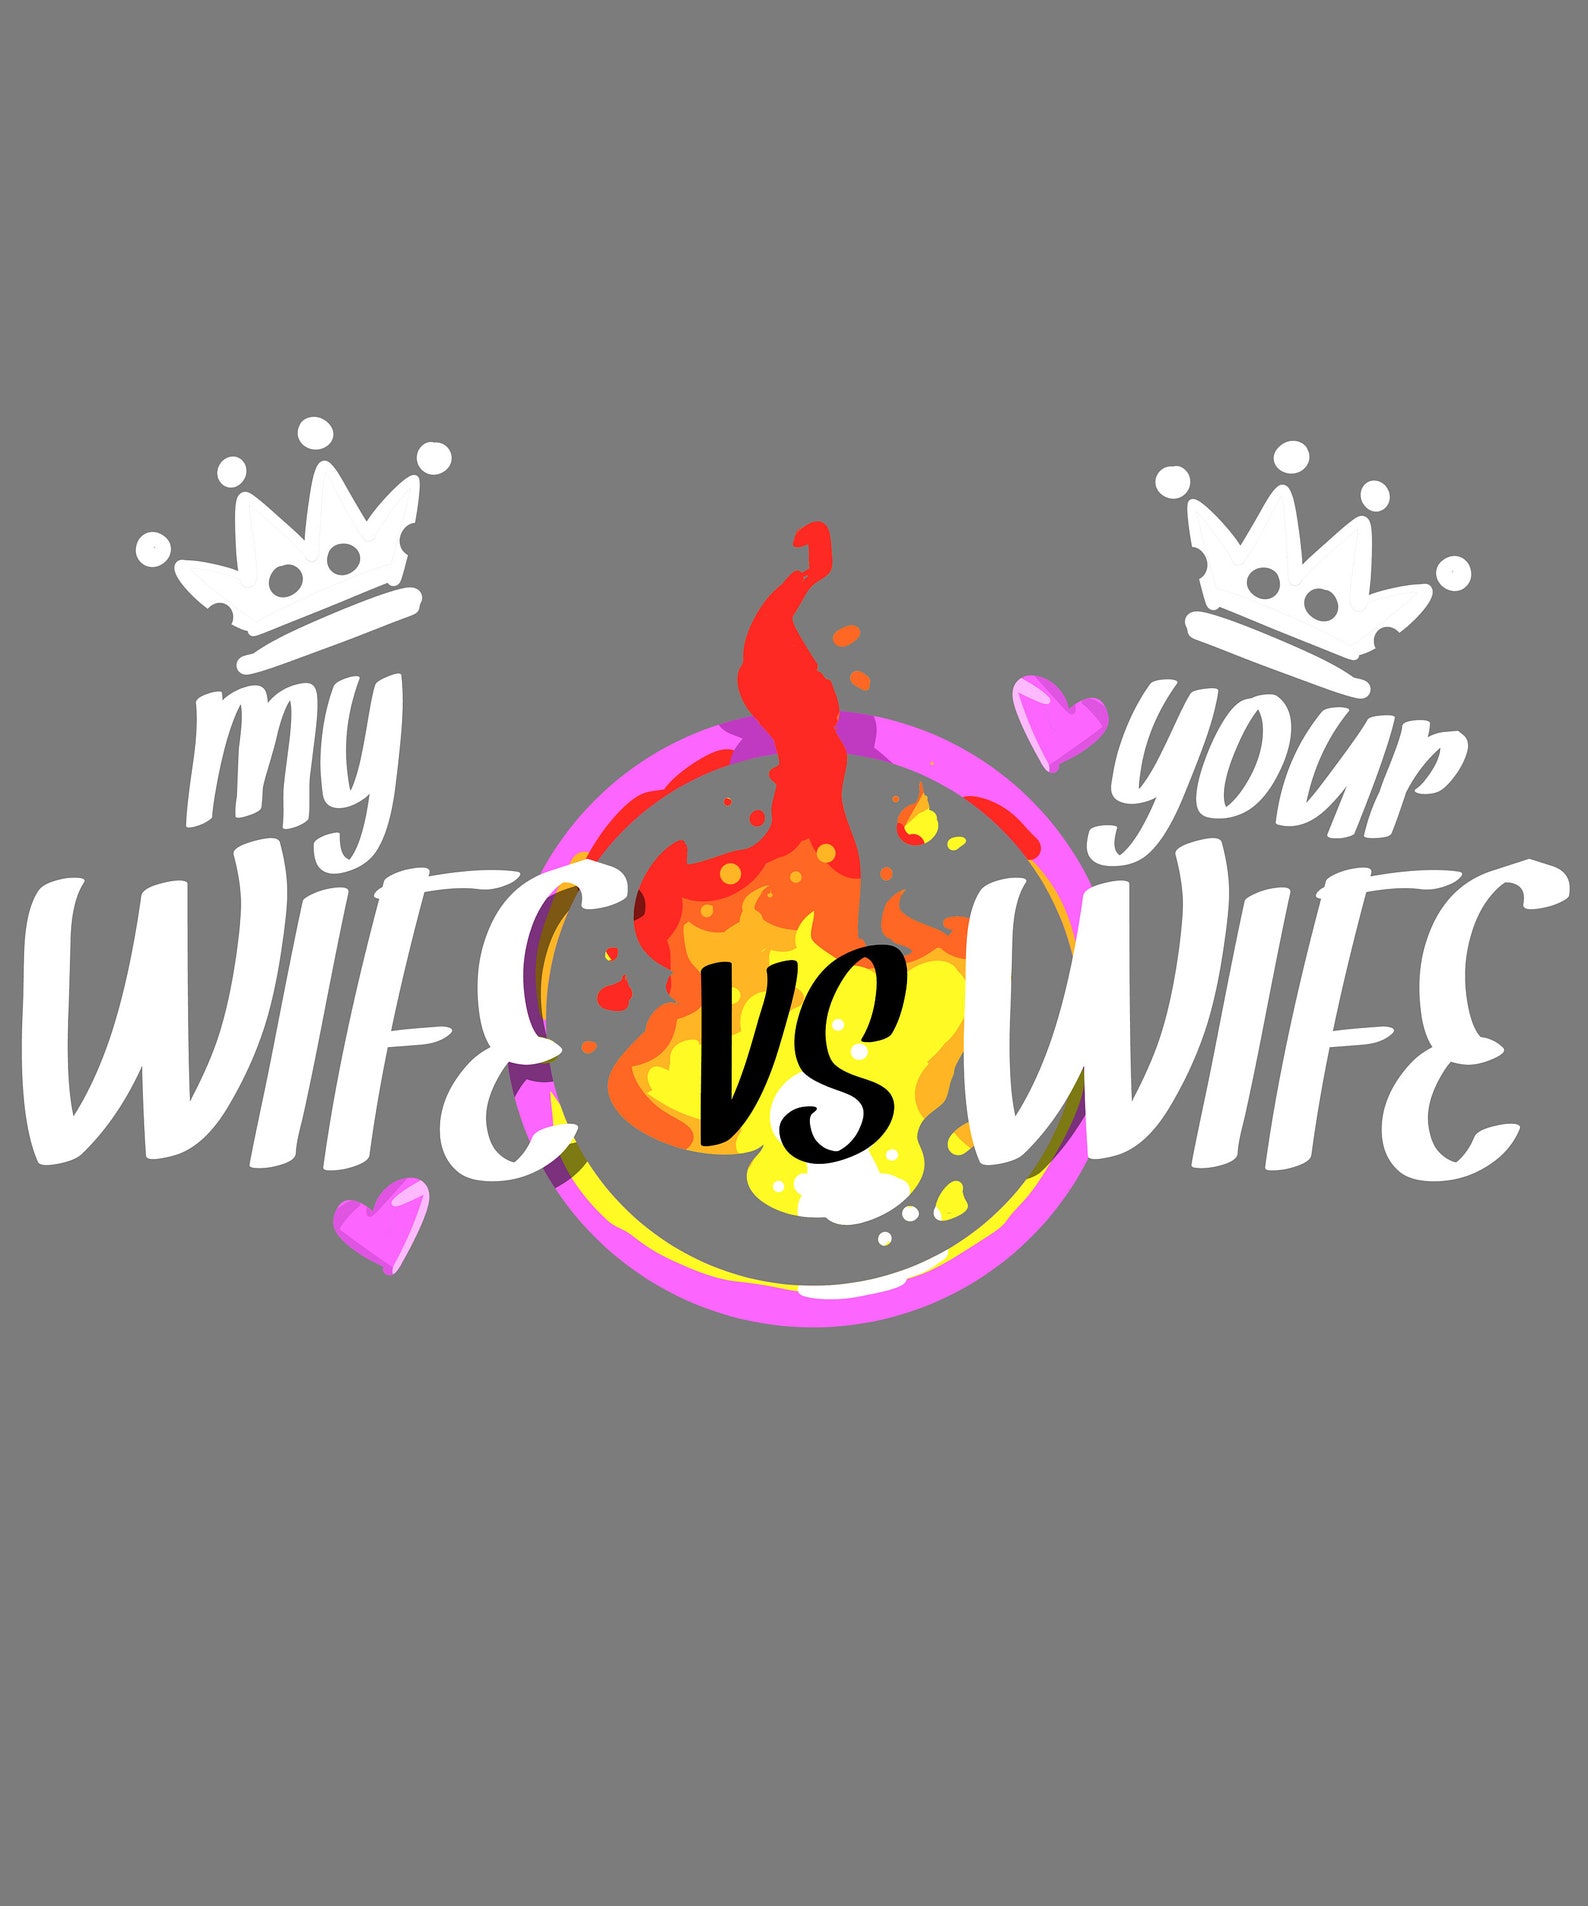 My Wife vs Your Wife Funny Marriage Gift Printable Art Etsy image